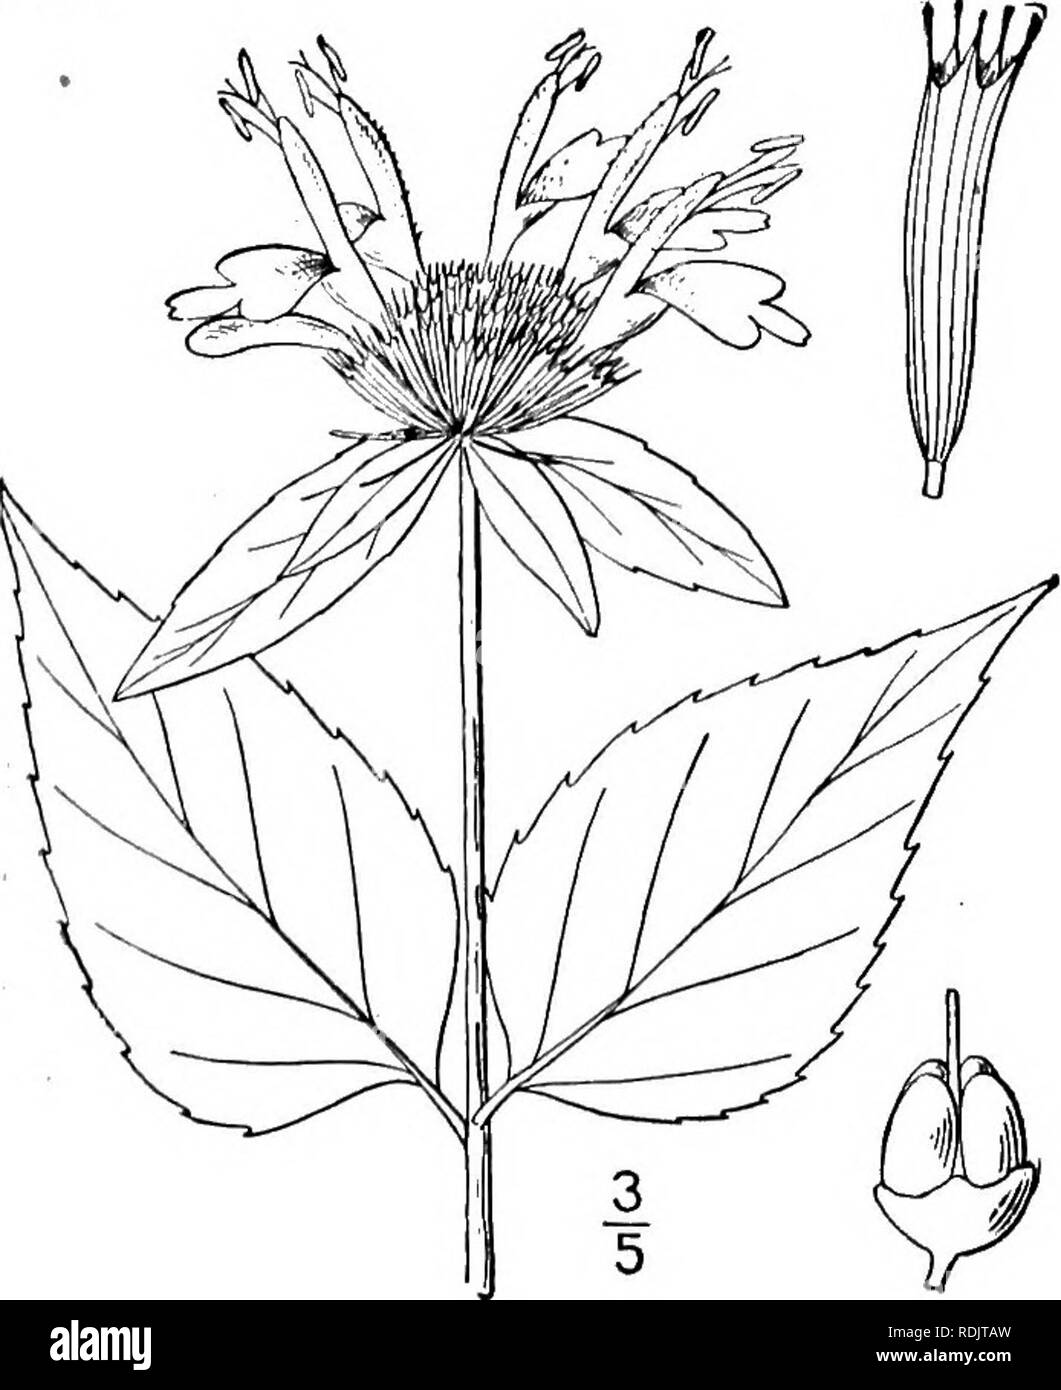 . An illustrated flora of the northern United States, Canada and the British possessions, from Newfoundland to the parallel of the southern boundary of Virginia, and from the Atlantic Ocean westward to the 102d meridian. Botany; Botany. 2. Monarda clinopodia L. Basal Balm. Fig- 3637- Monarda clinopodia L. Sp. PI. 22. 1753. Pycnanthemum Monardella Michx. Fl. Bor. Am. 2: 8. pi. 34. 1803. Perennial; stem slender, simple, or with few long ascending branches, glabrous or somewhat villous, i°-3° high. Leaves lanceolate, ovate or ovate-lan- ceolate, membranous, bright green, mostly slender- petioled, Stock Photo